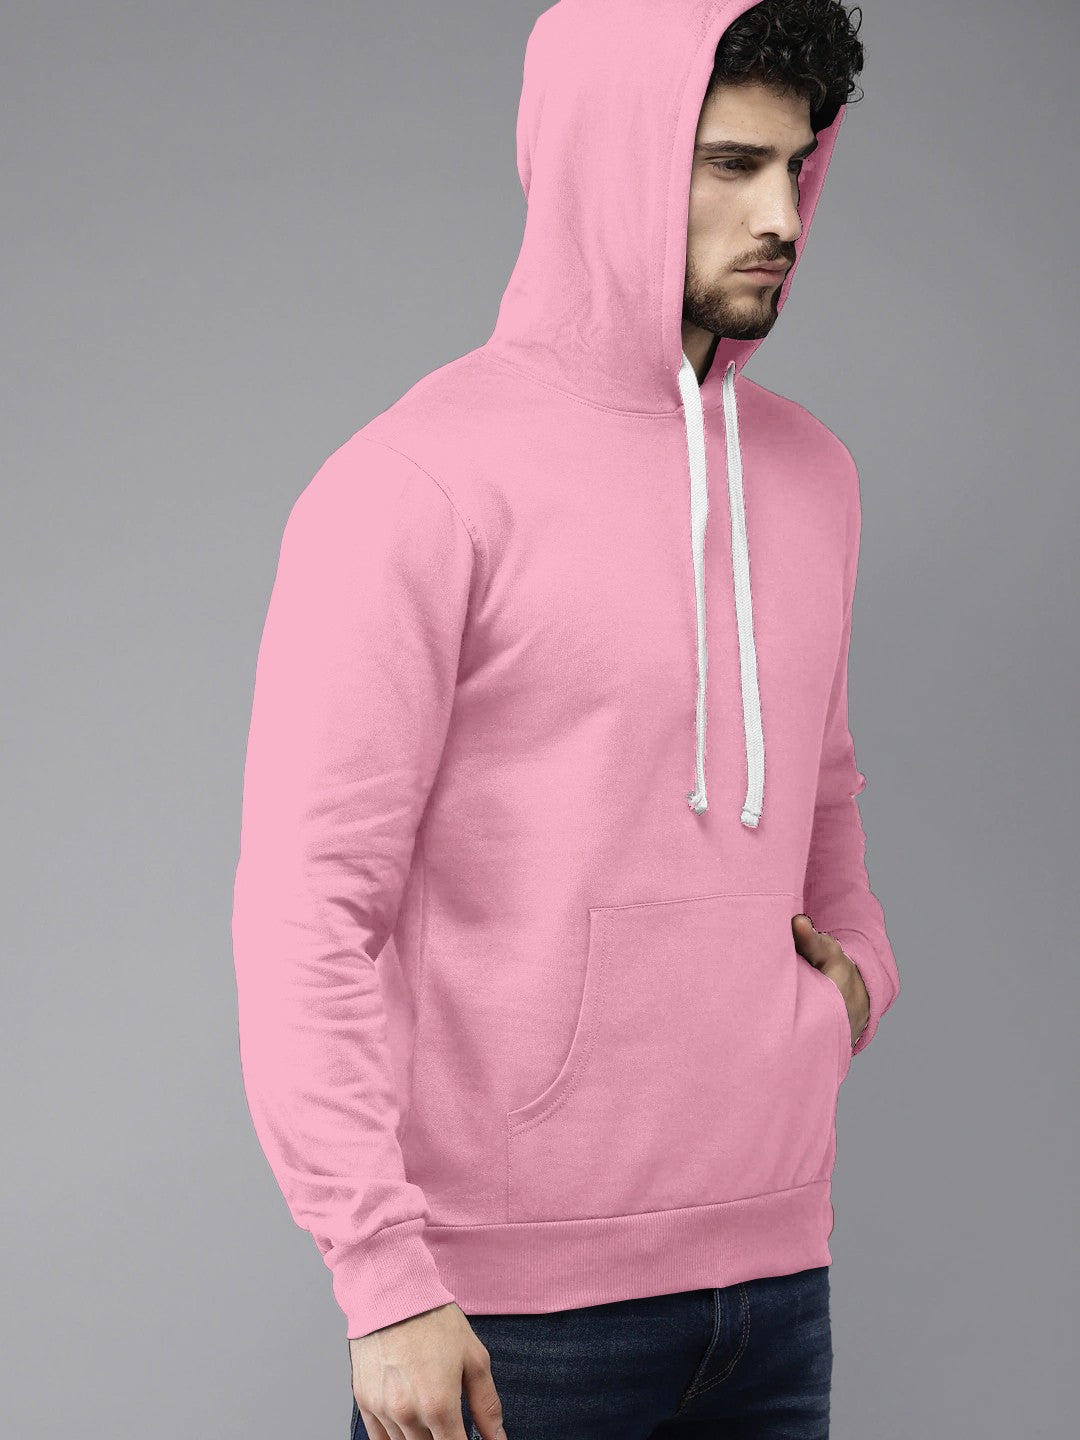 Light Pink Colour High Quality Premium Hoodie For Men